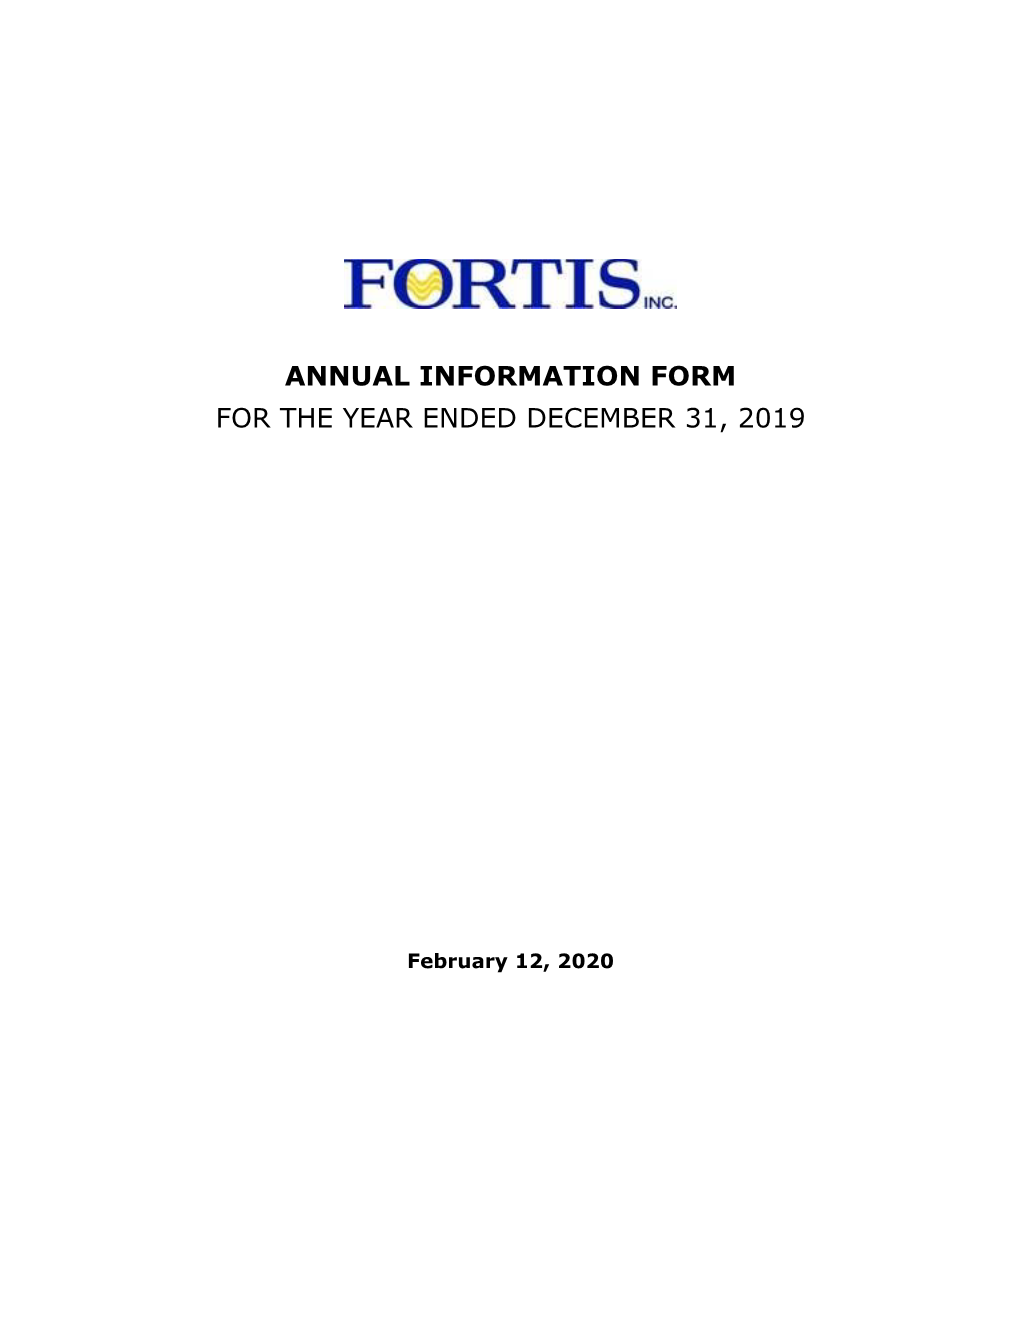 Annual Information Form for the Year Ended December 31, 2019